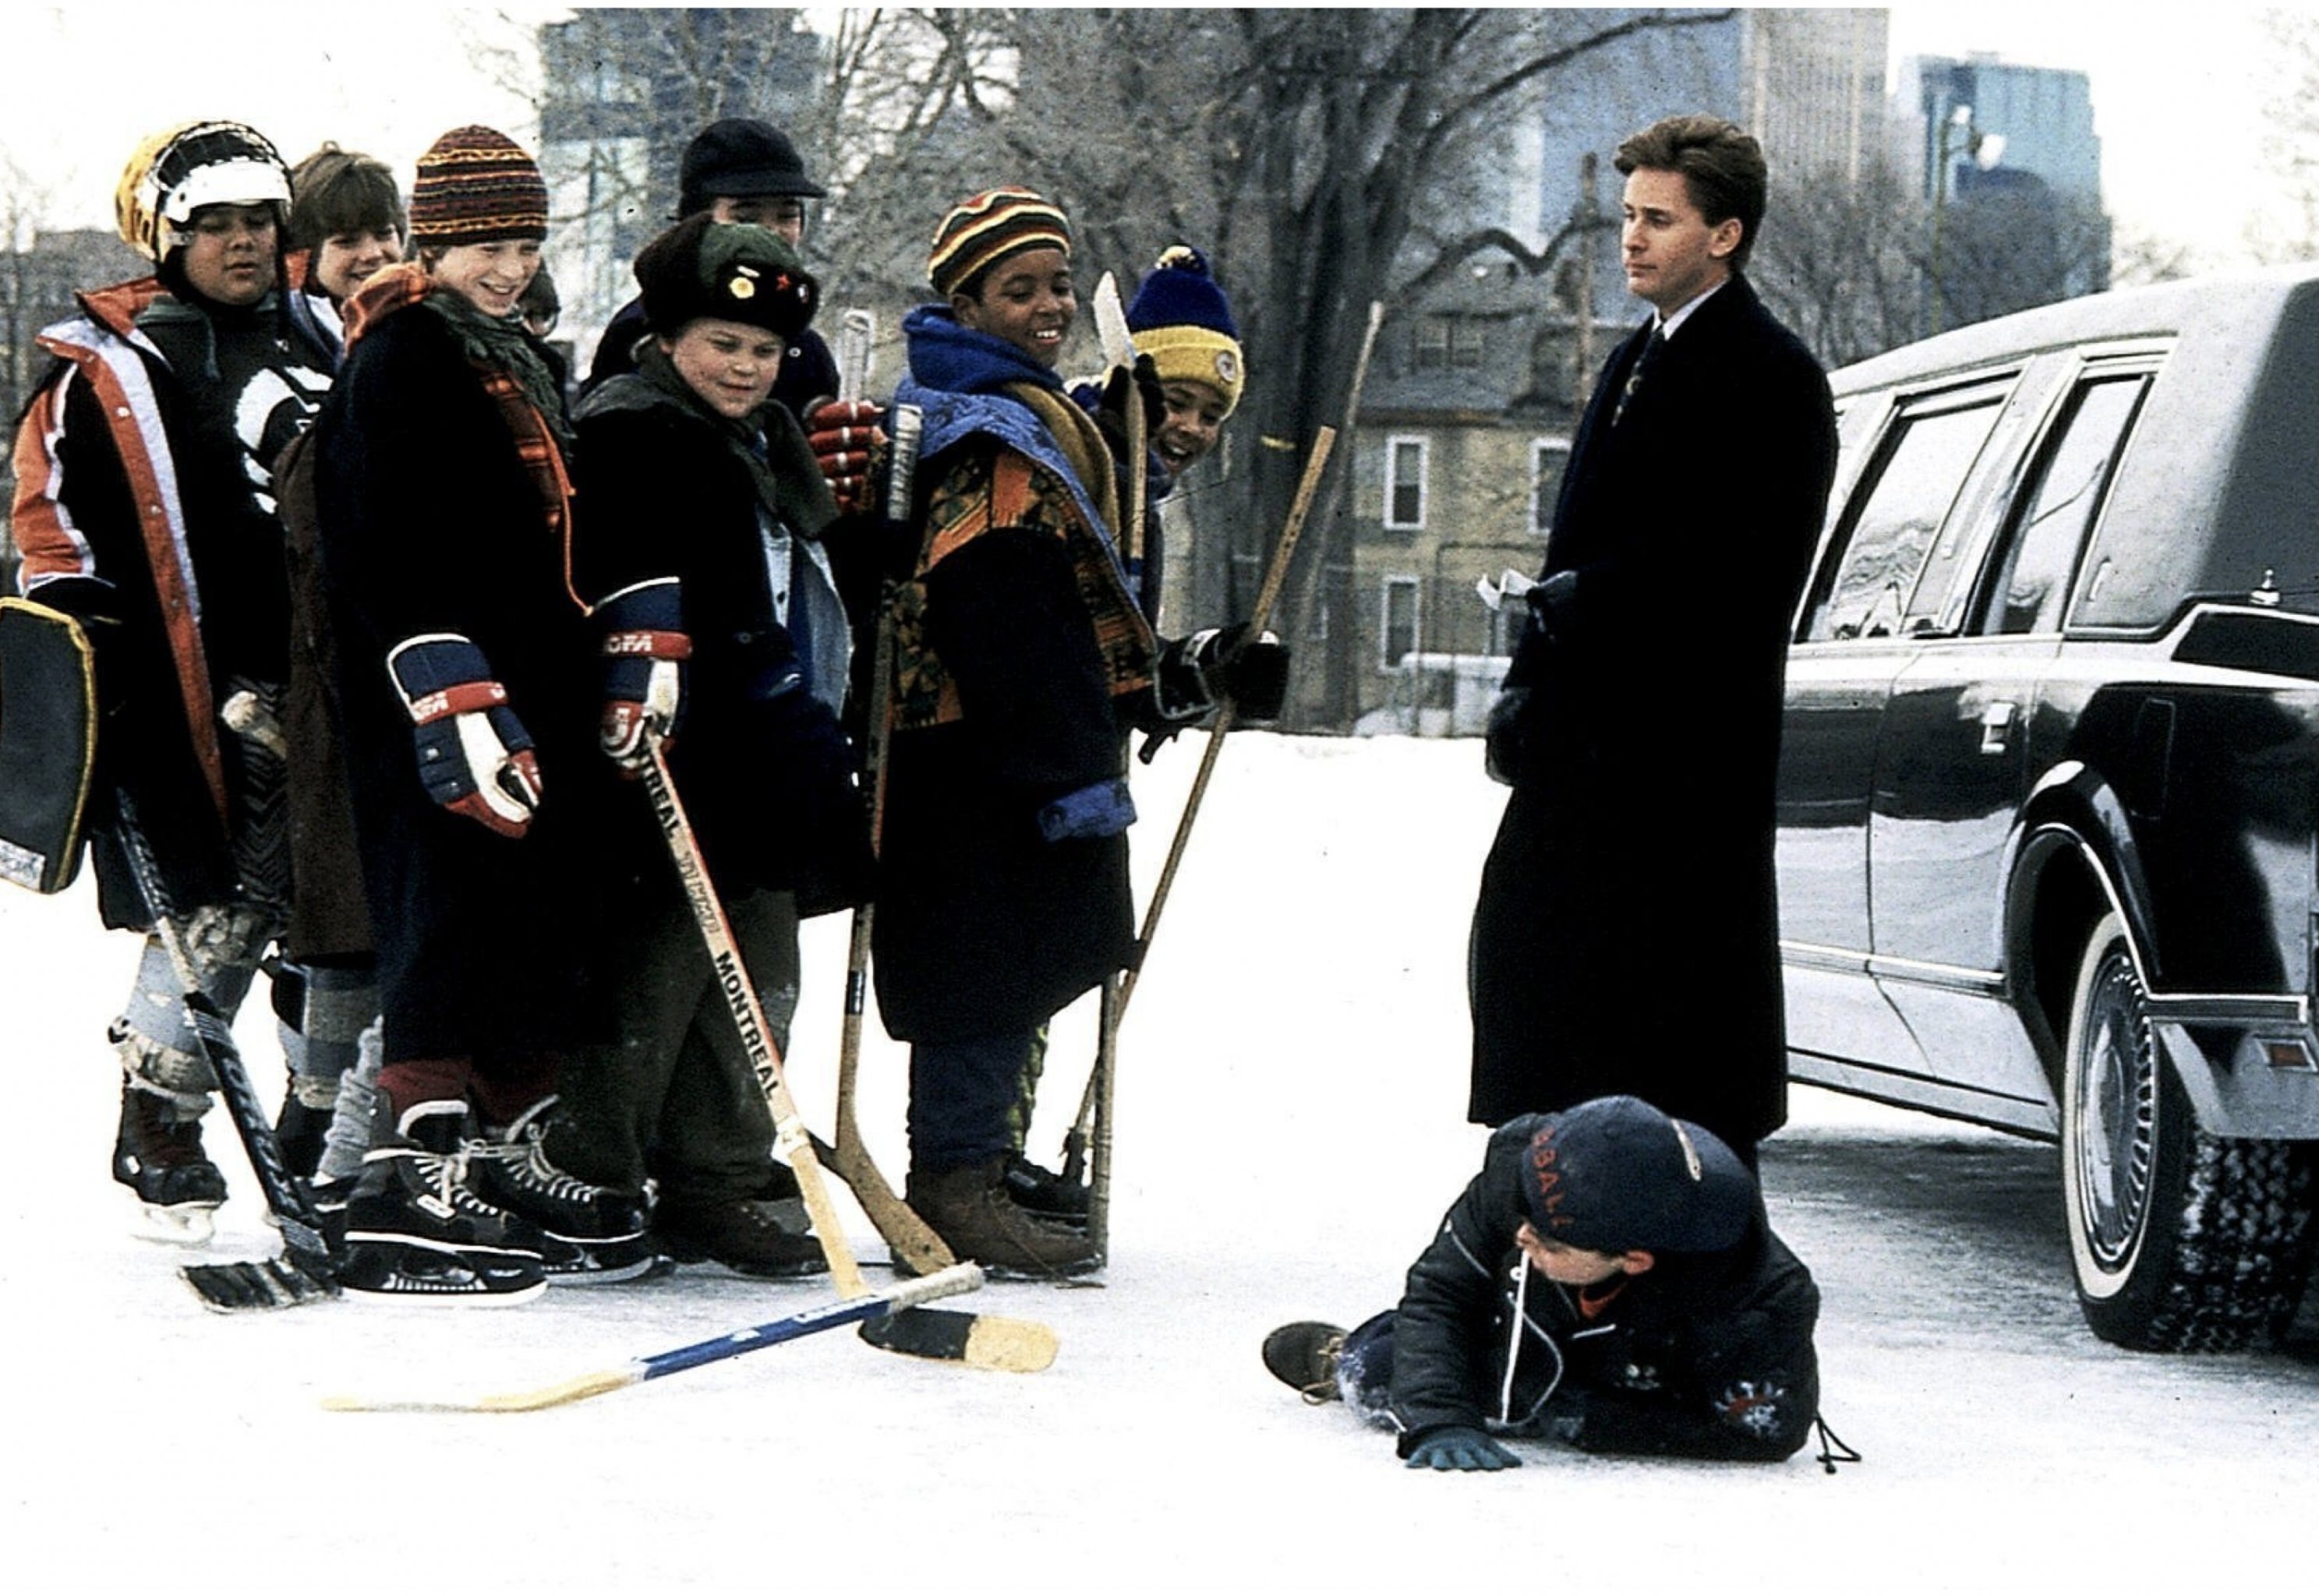 Which Mighty Ducks had a shot to go all the way